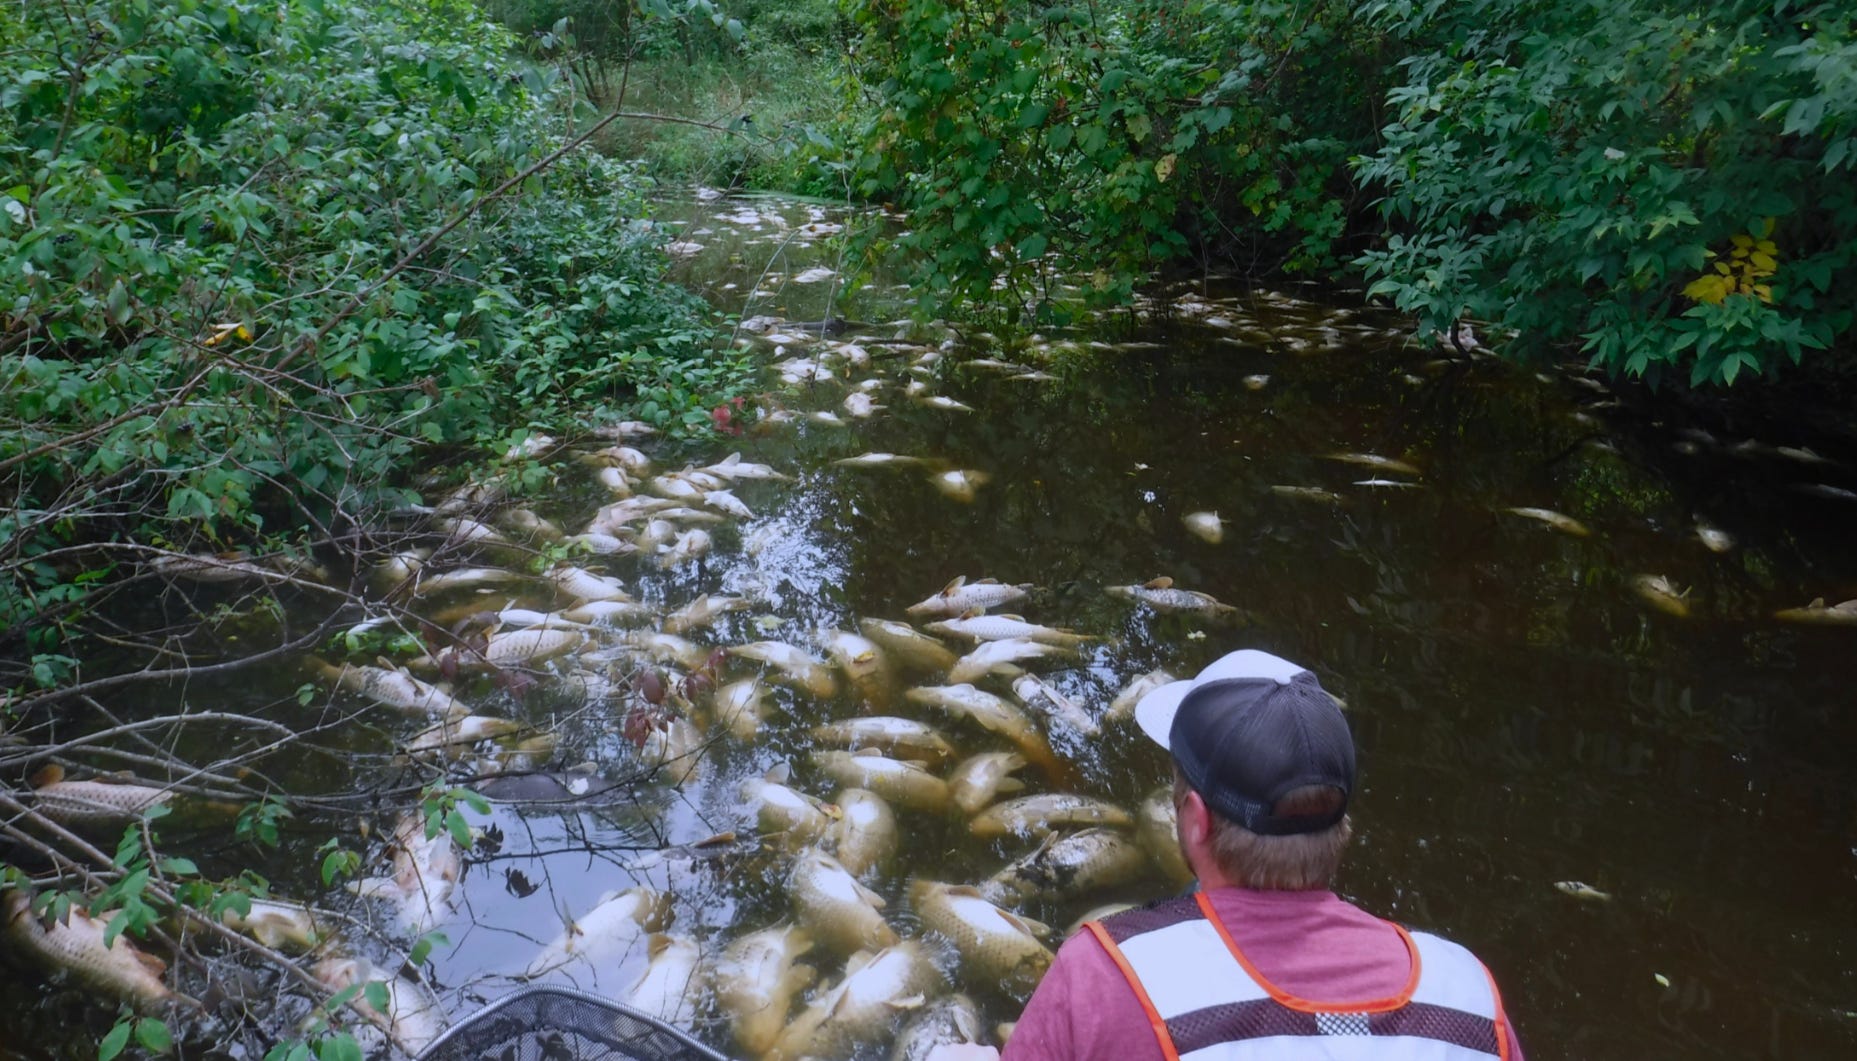 In August 2018, a combination of manure spreading and heavy rains damaged miles of the Sheboygan River, killing fish.